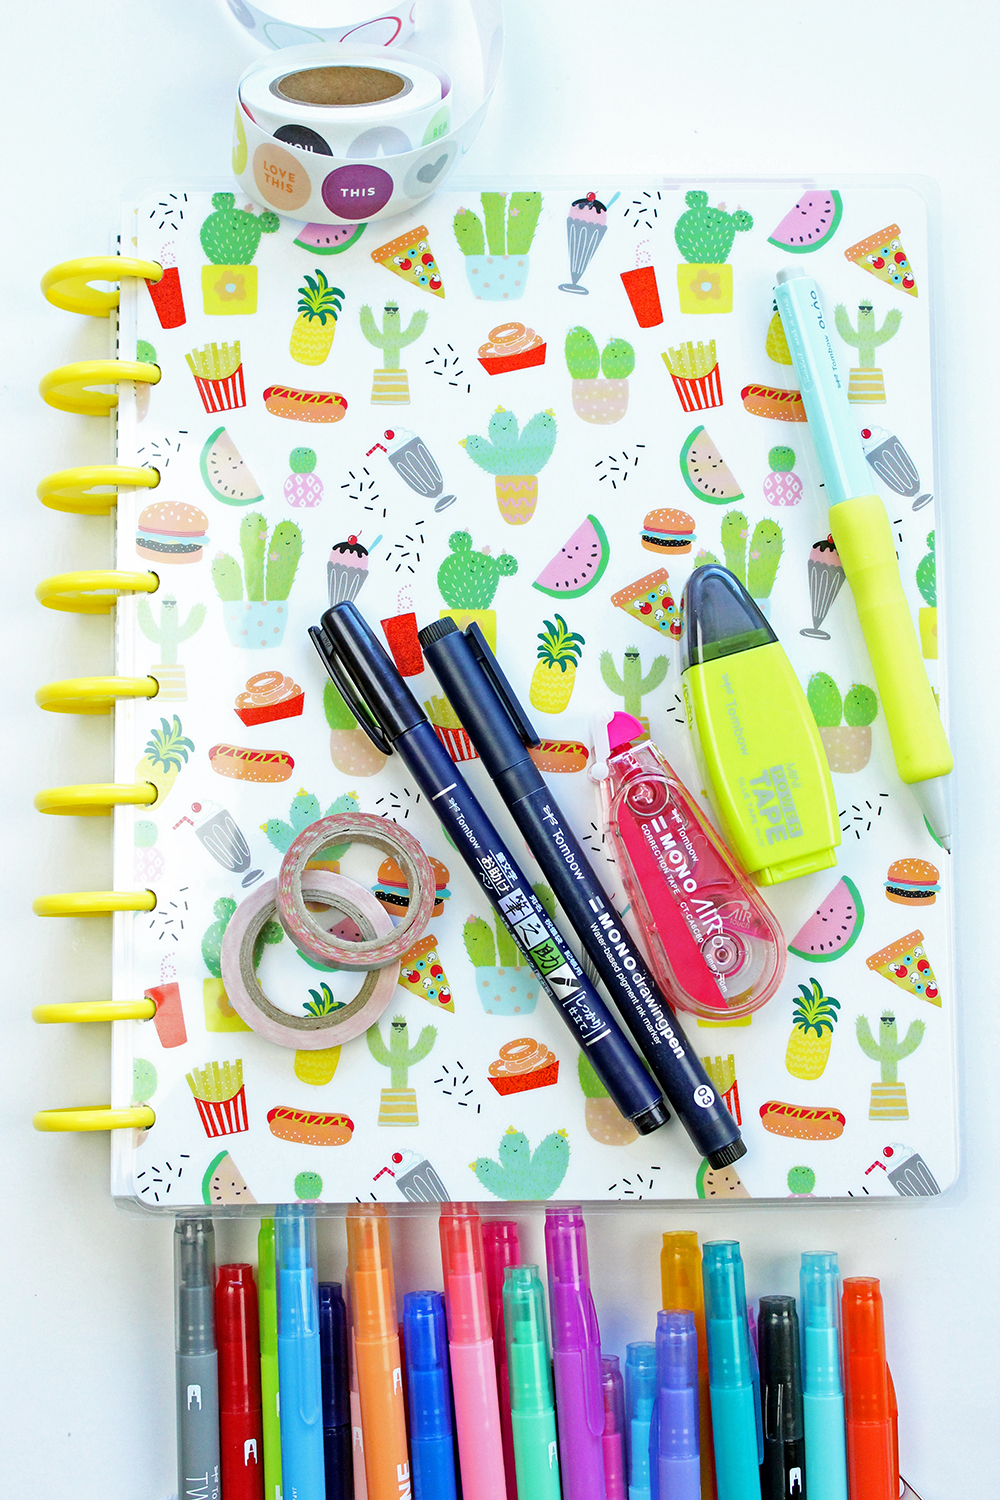 If getting organized is on your agenda this year check out this list! @jenniegarcian created this list with the best planner products! #planner #tombow 